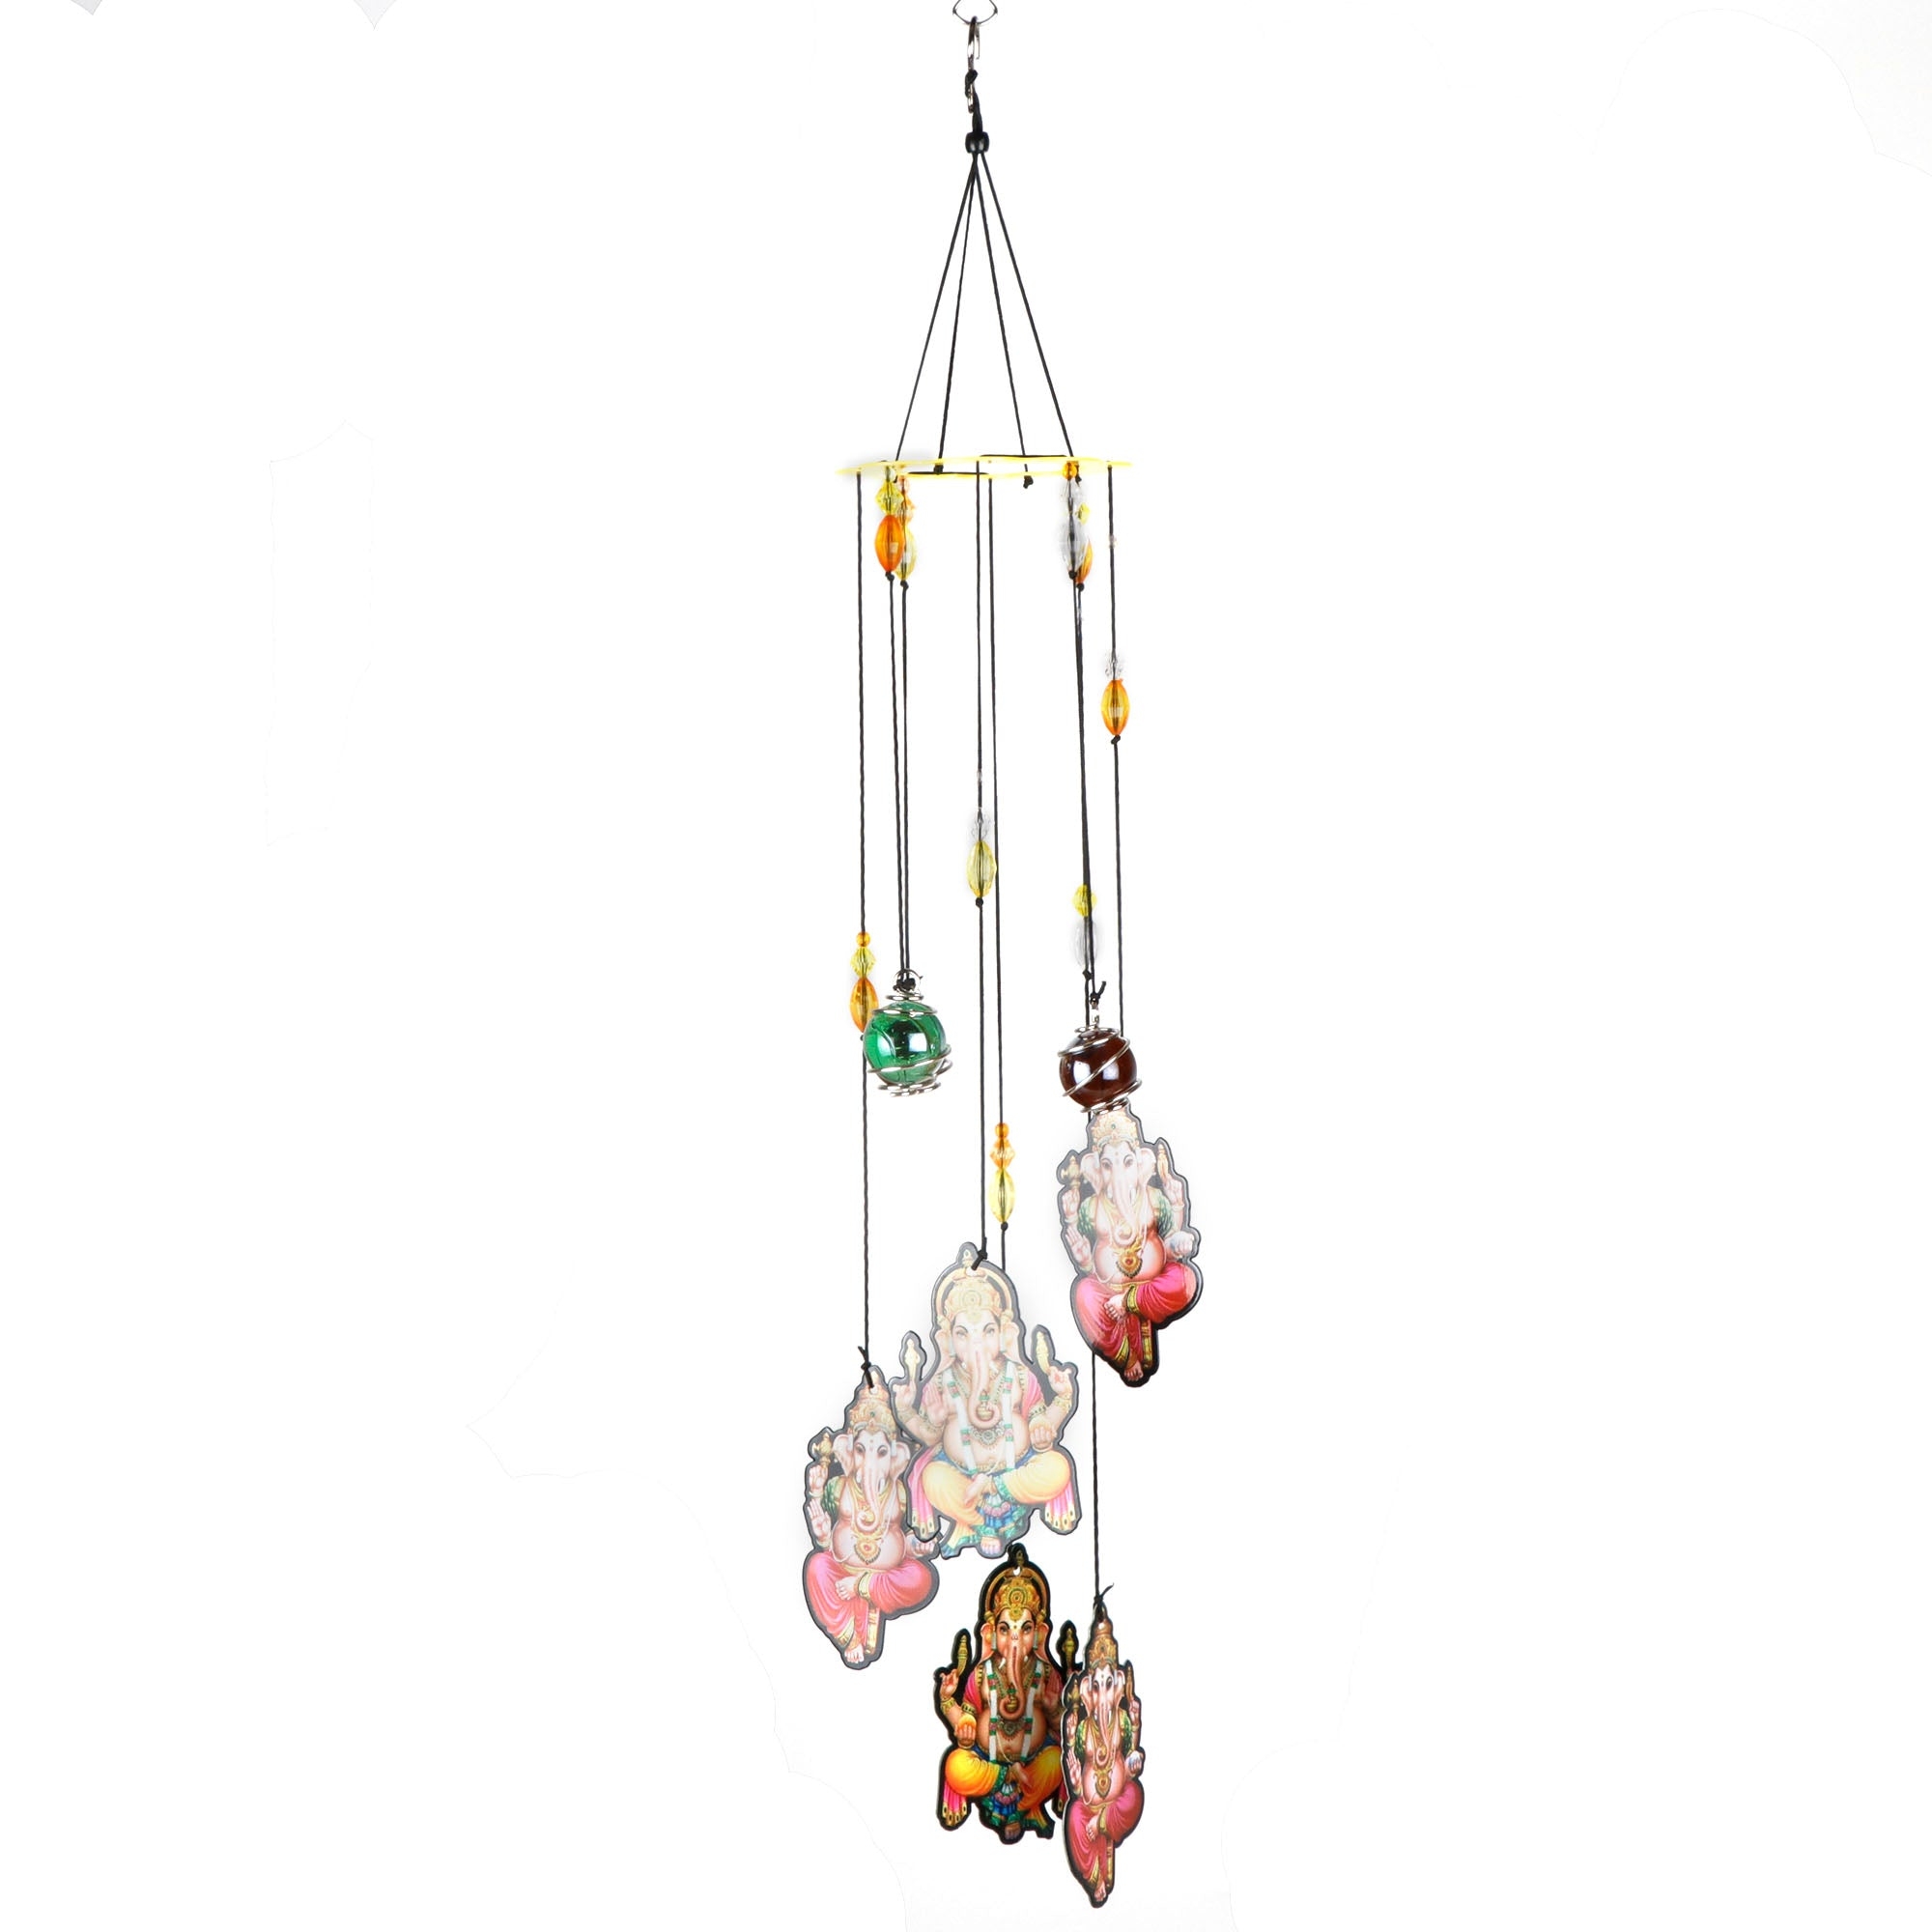 Archies KEEPSAKE Metal Wind Chimes with 4 Bells with Door wind chain Wall Hanger 55CM Multicolor